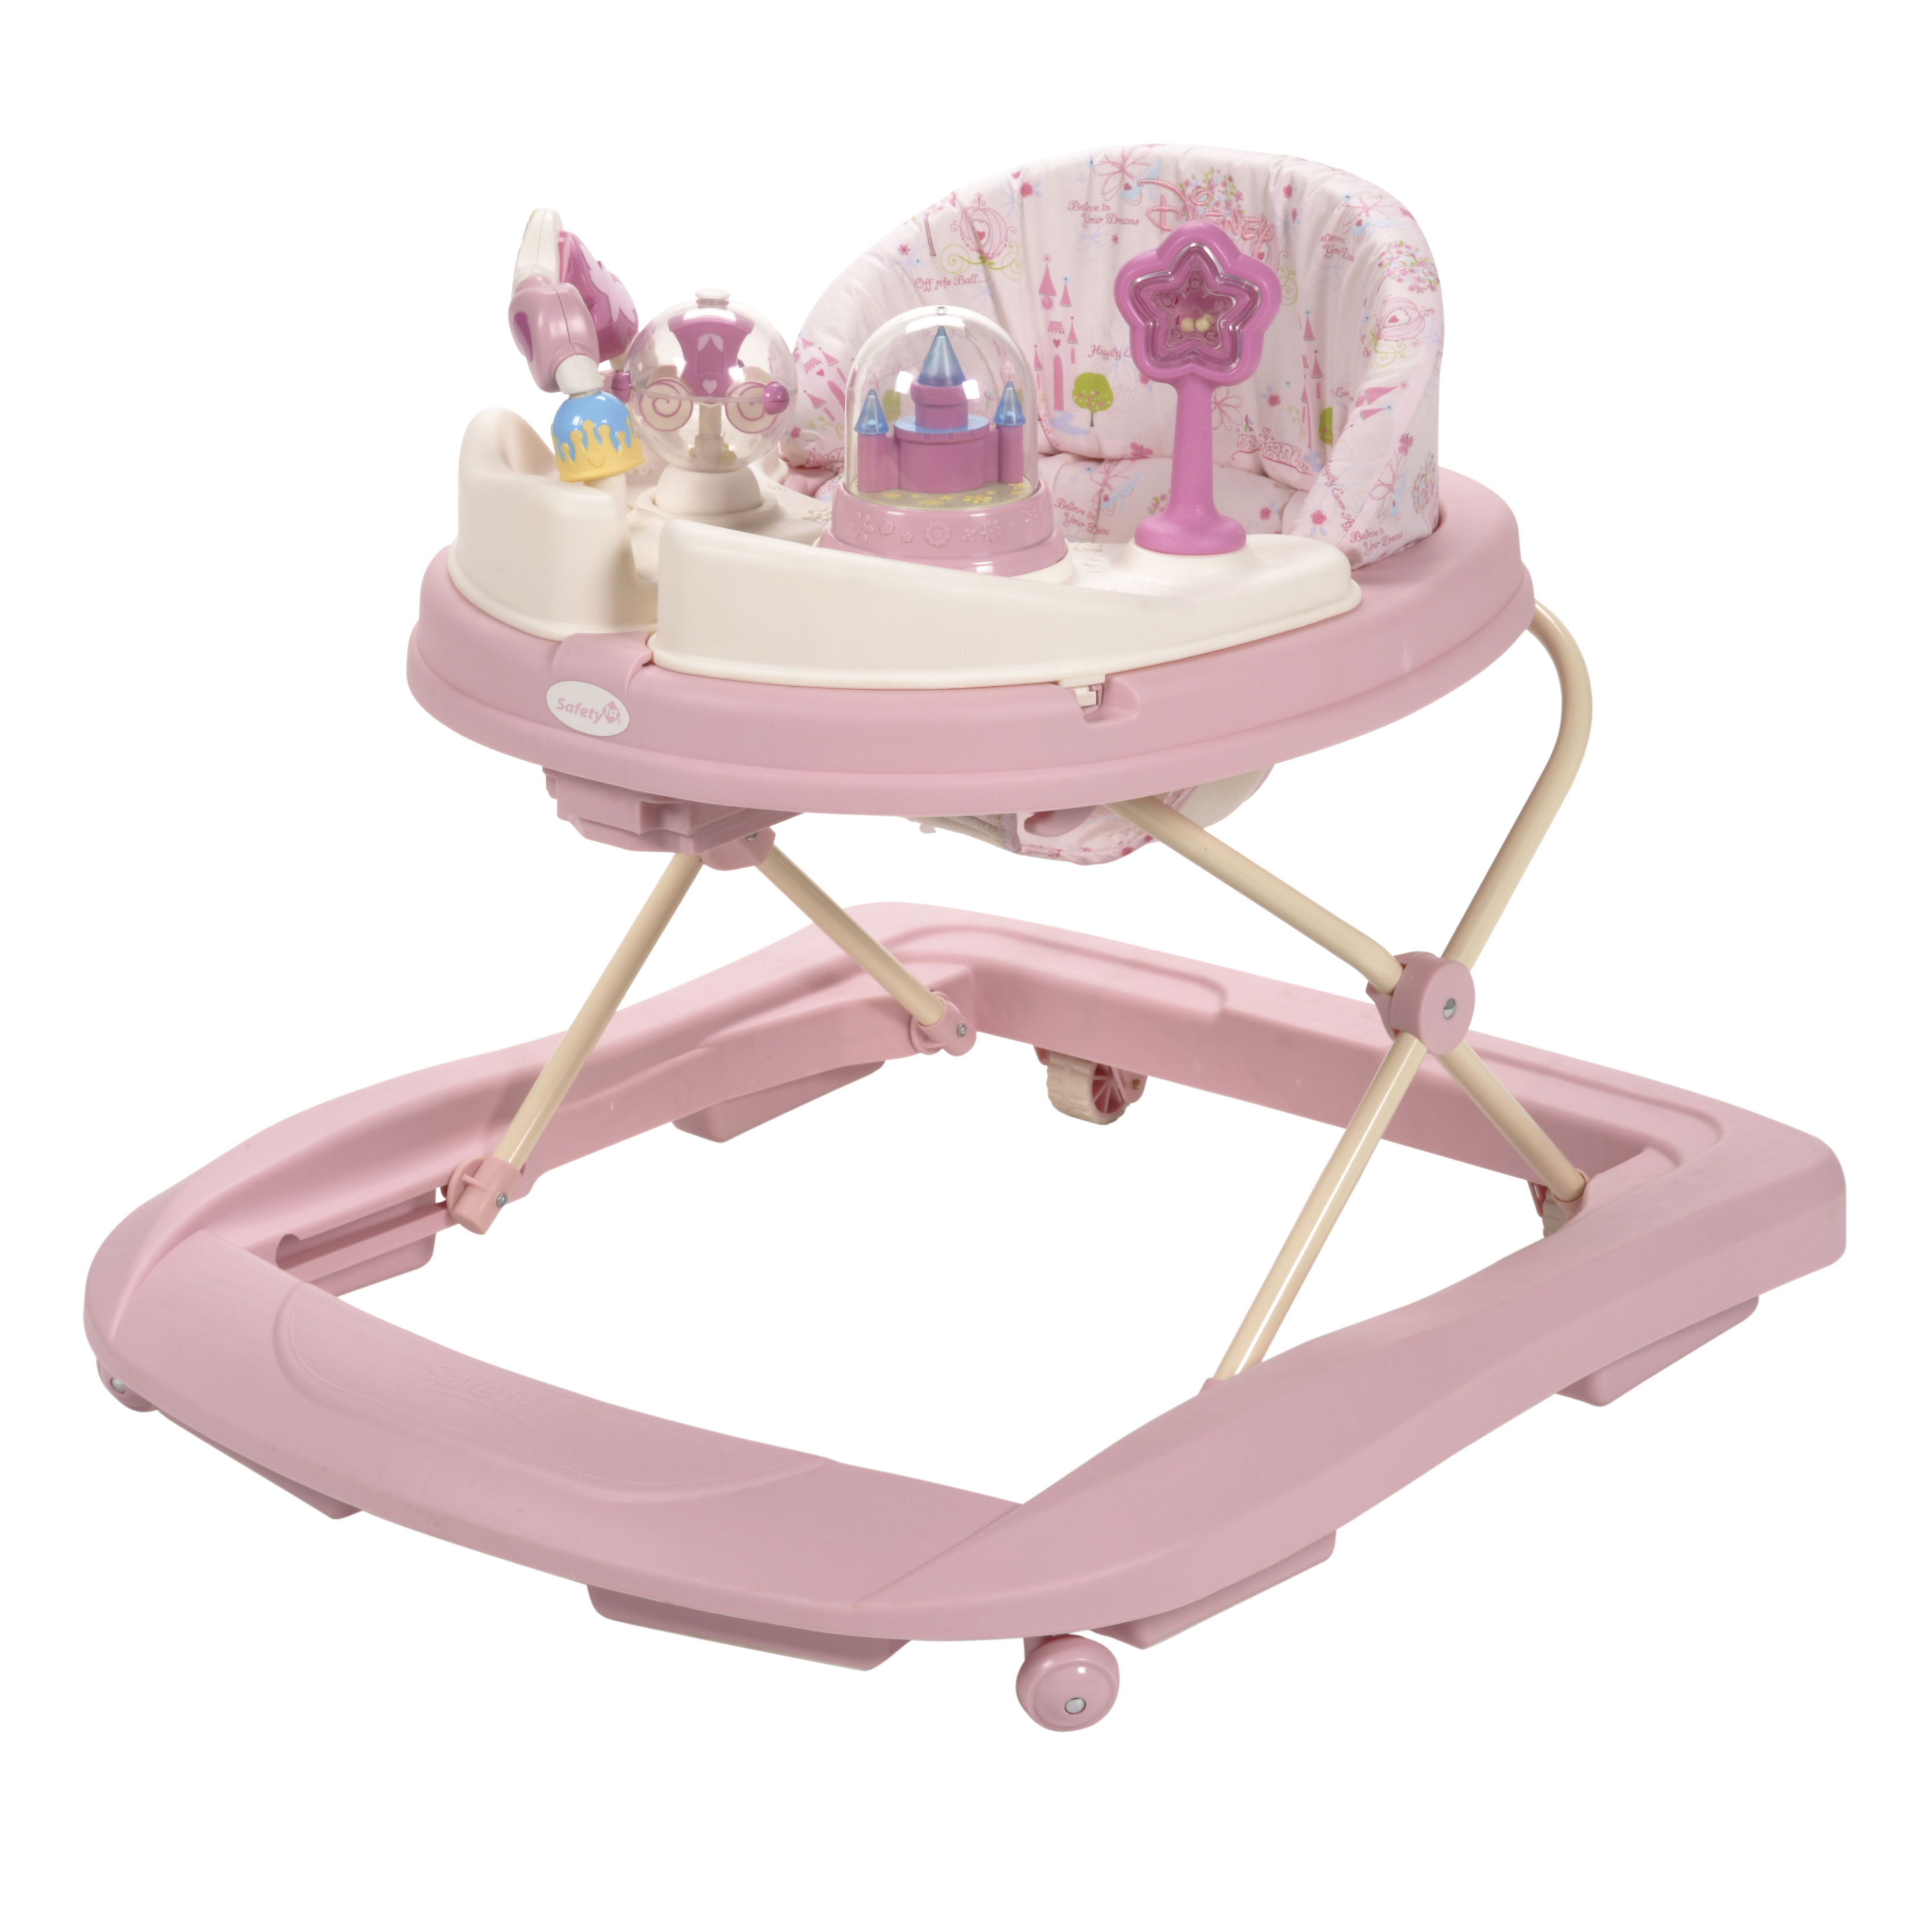 Disney Baby Music & Lights Walker, Happily Ever After - image 1 of 4